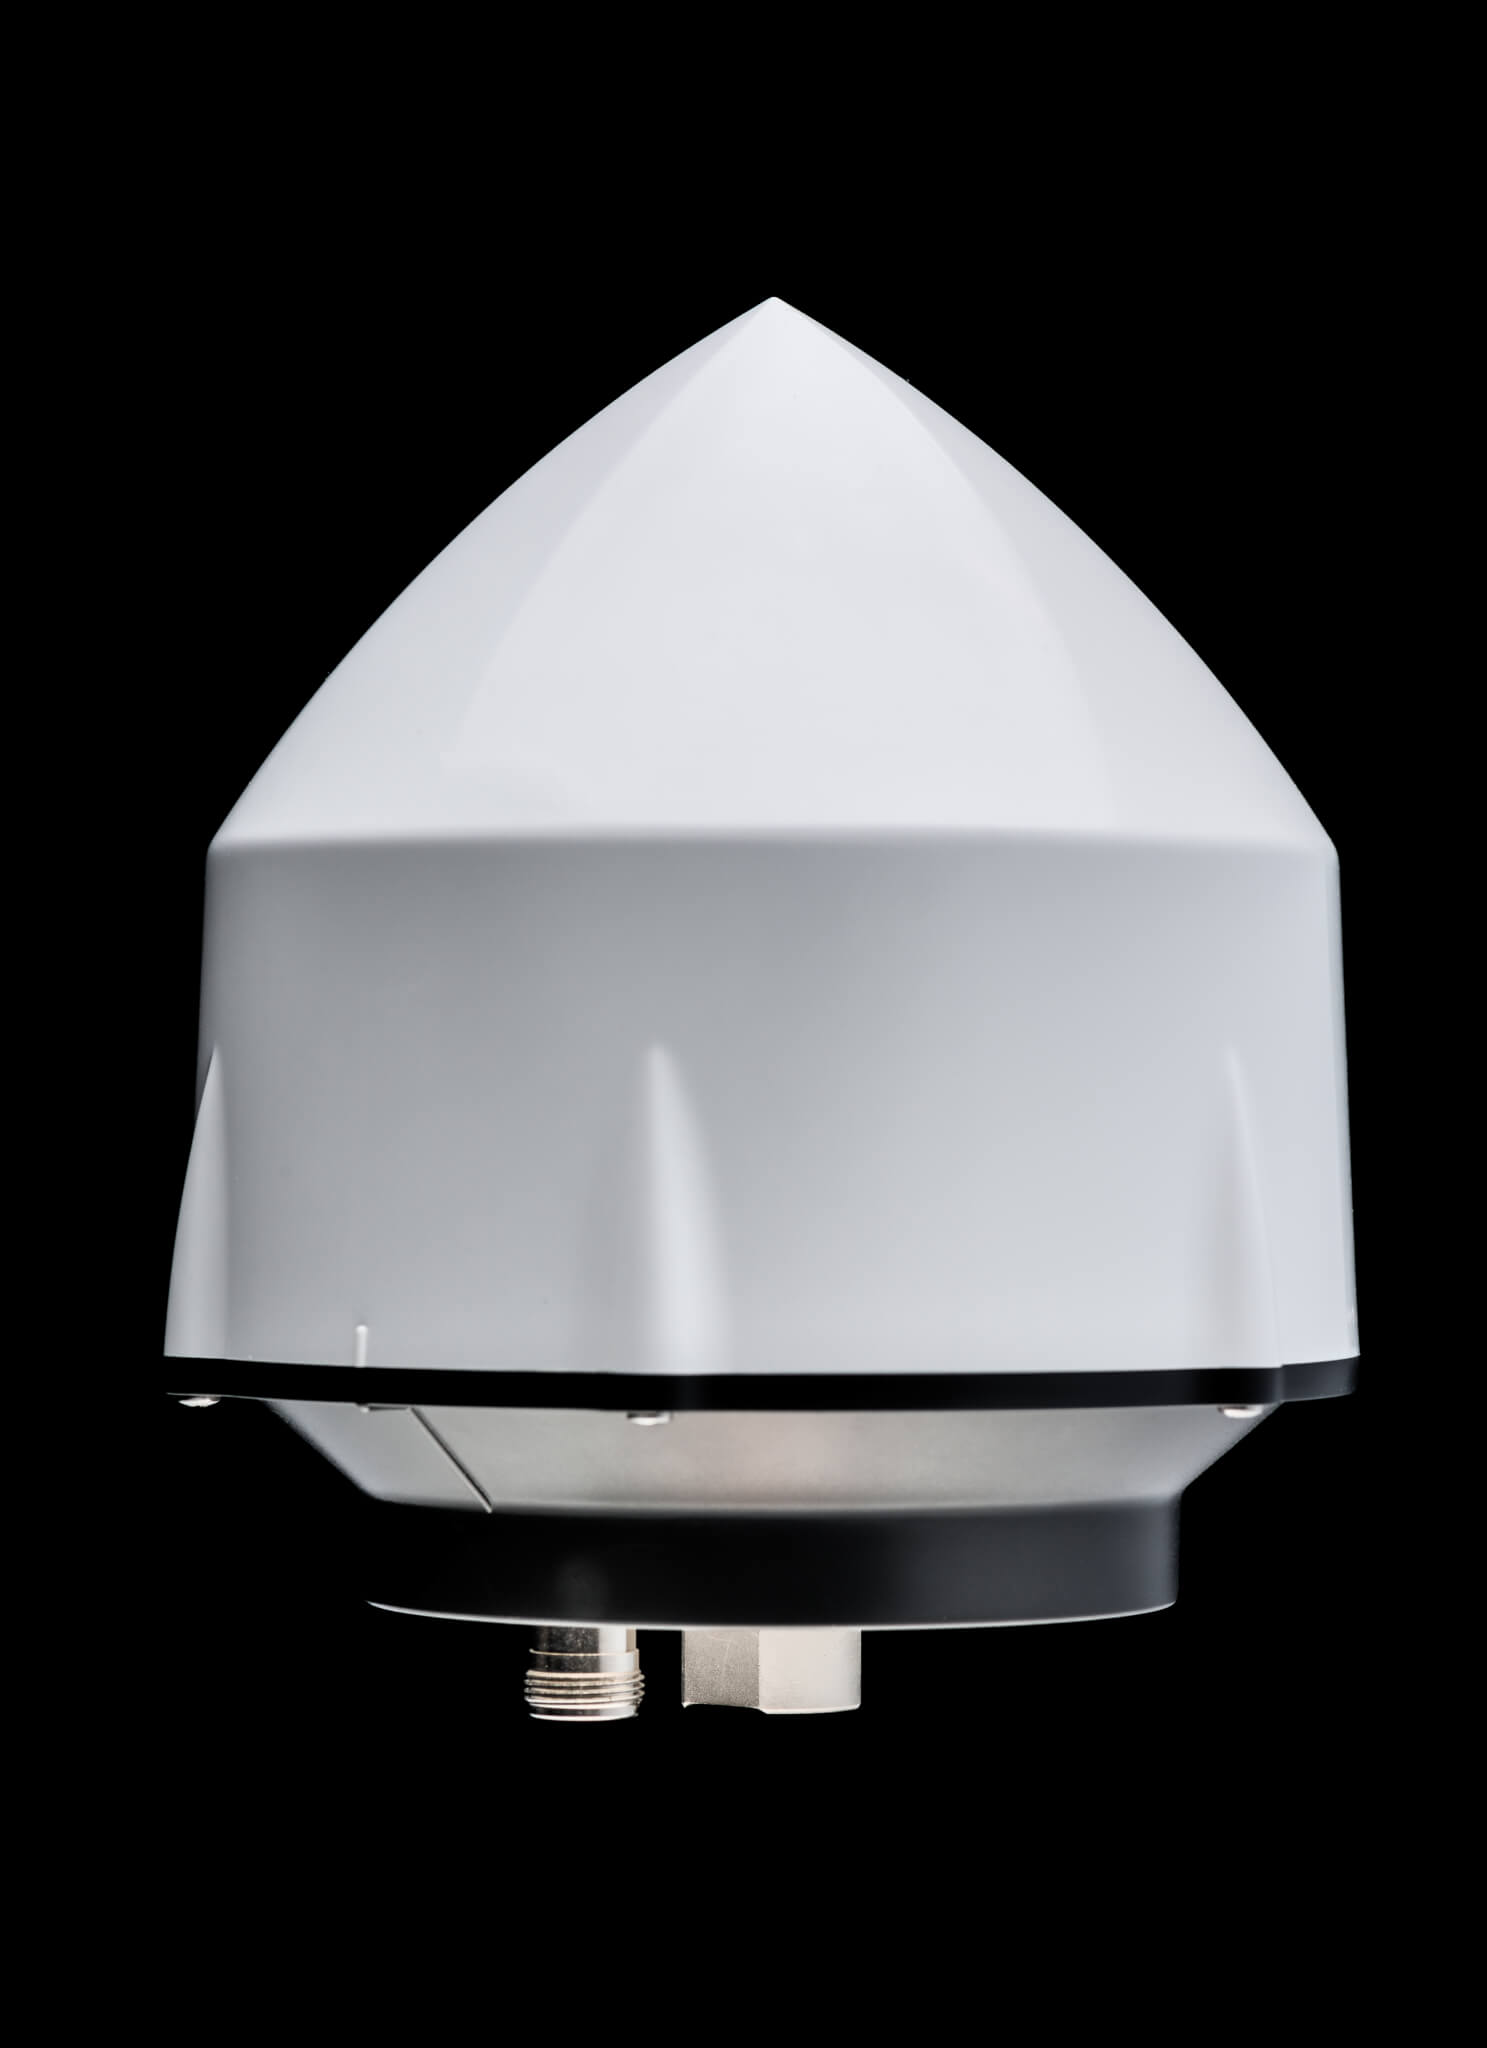 VeraPhase® 6300 Antenna Conical employed in RTK reference stations to enhance positional accuracy of rolling assets